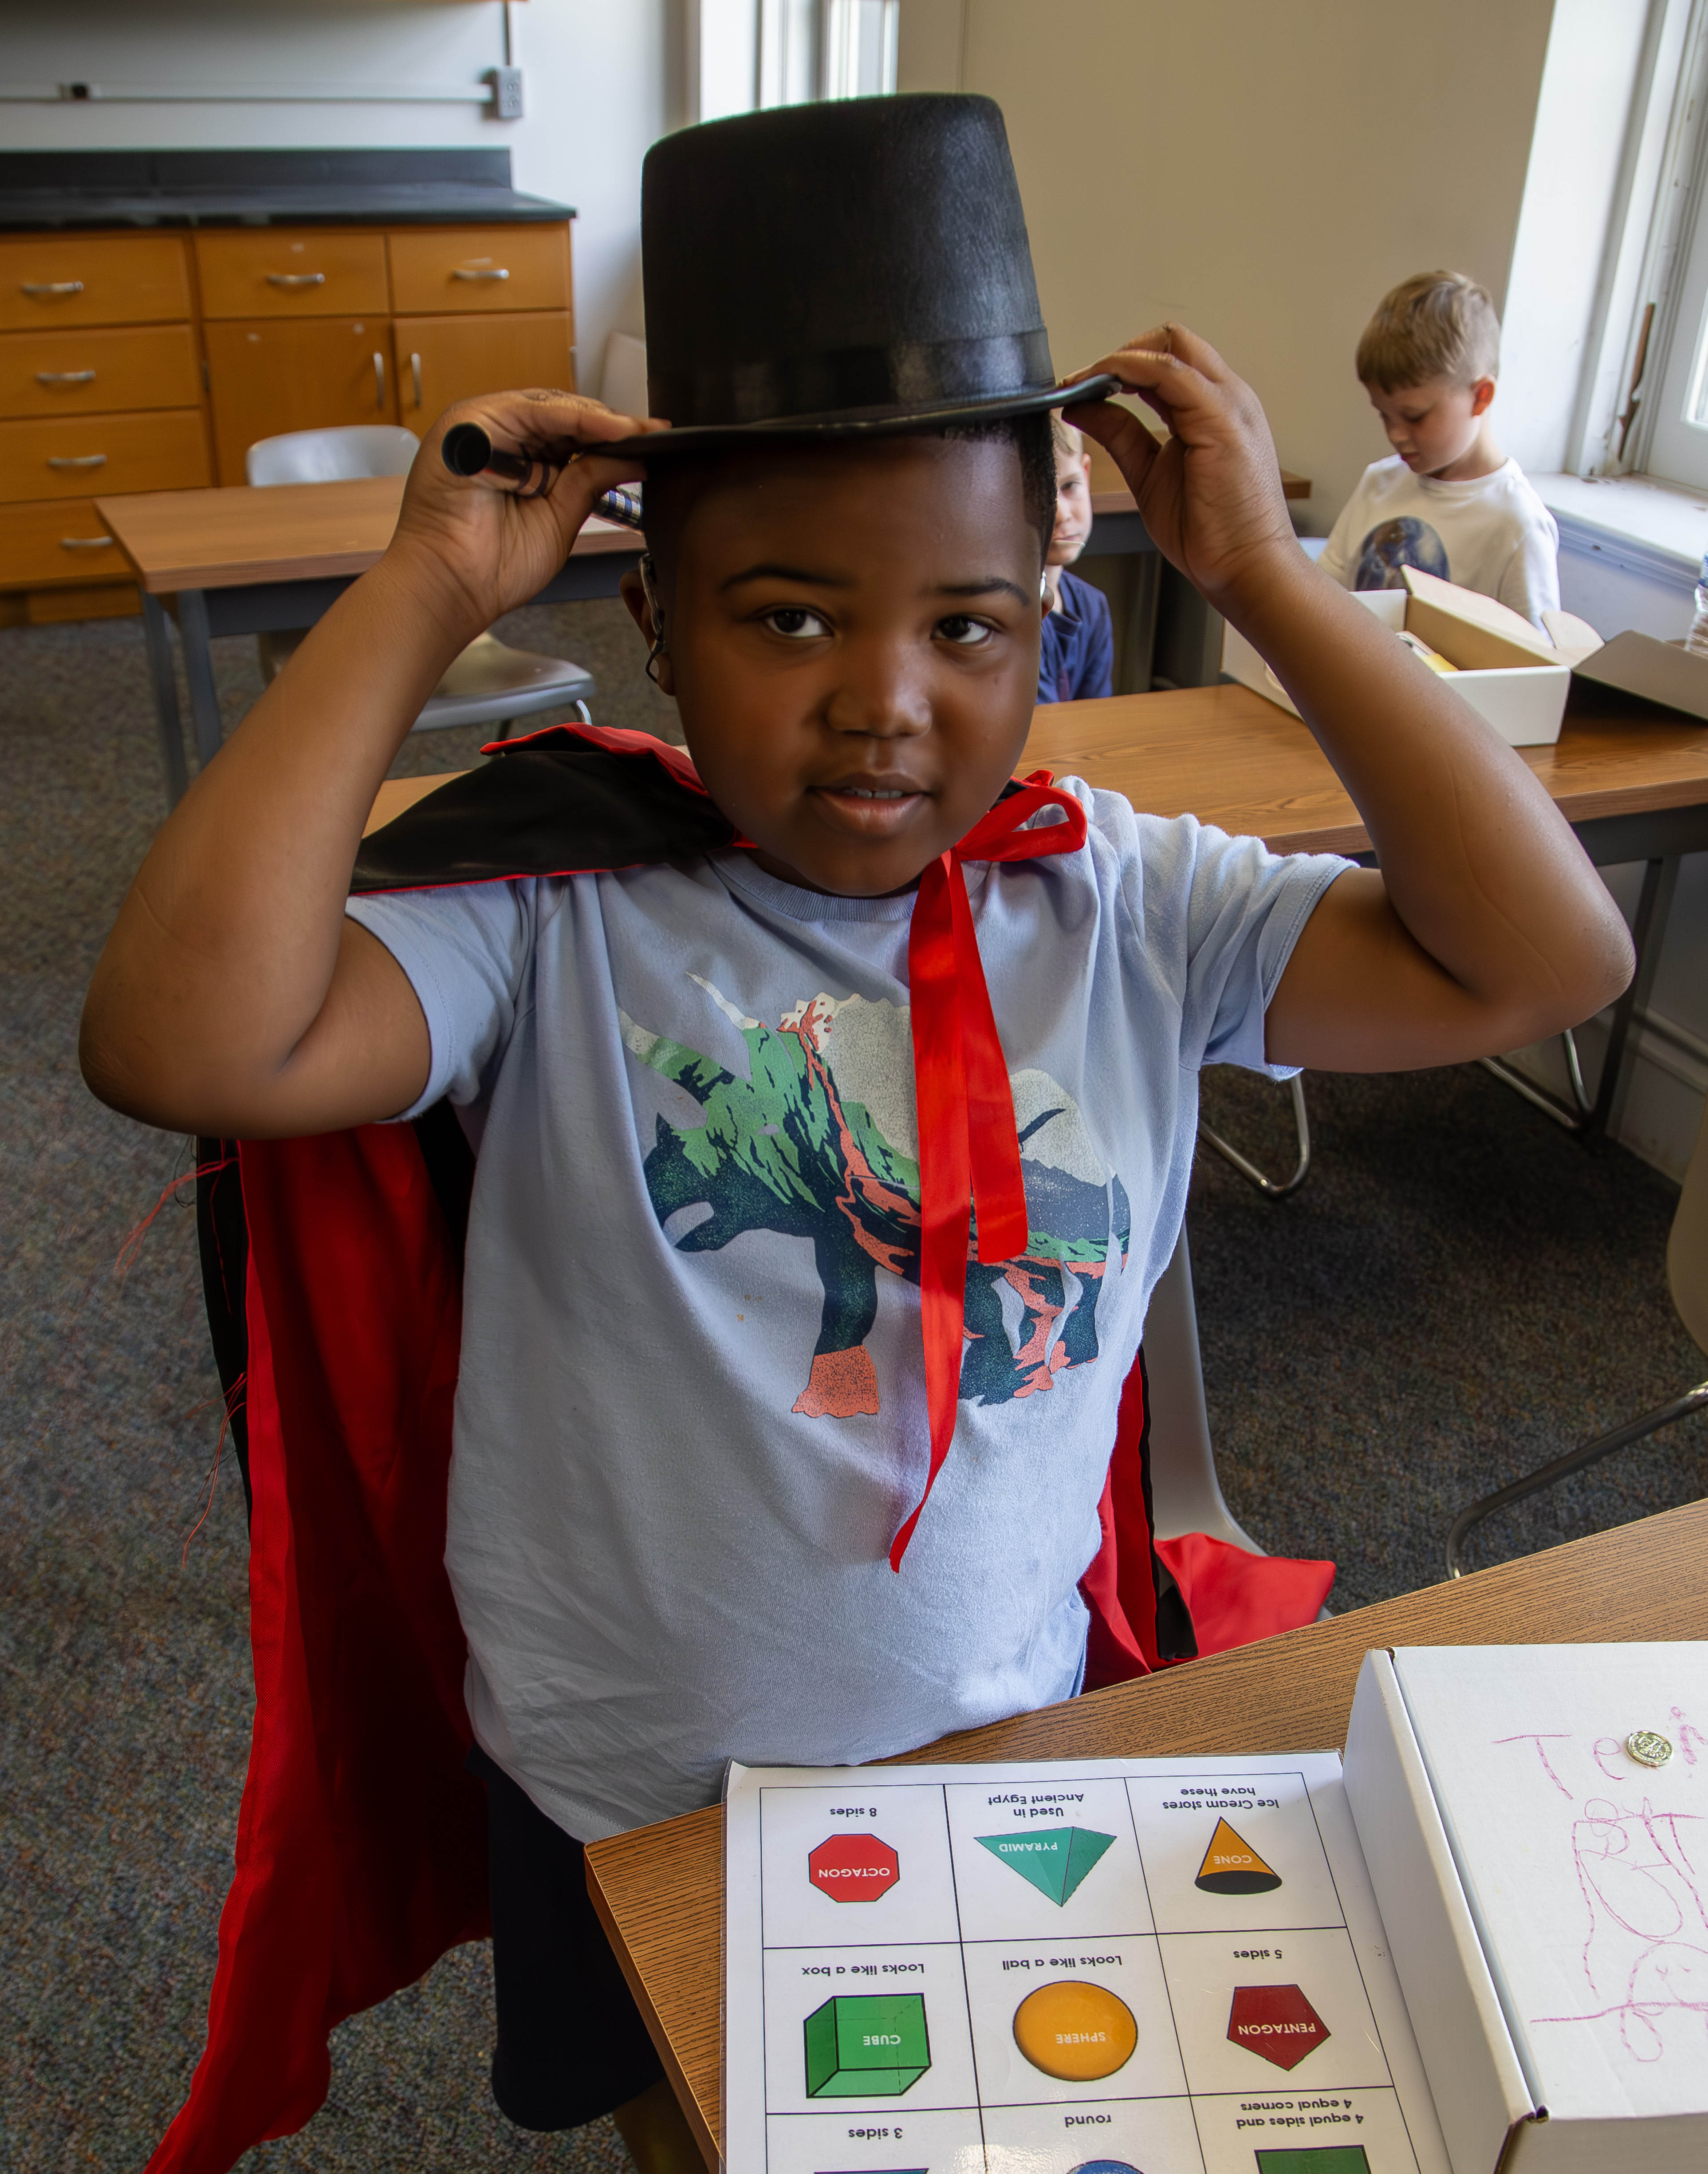 A College for Kids student learns about the wonders of magic tricks. LAURA INLOW/L&C MARKETING & PR